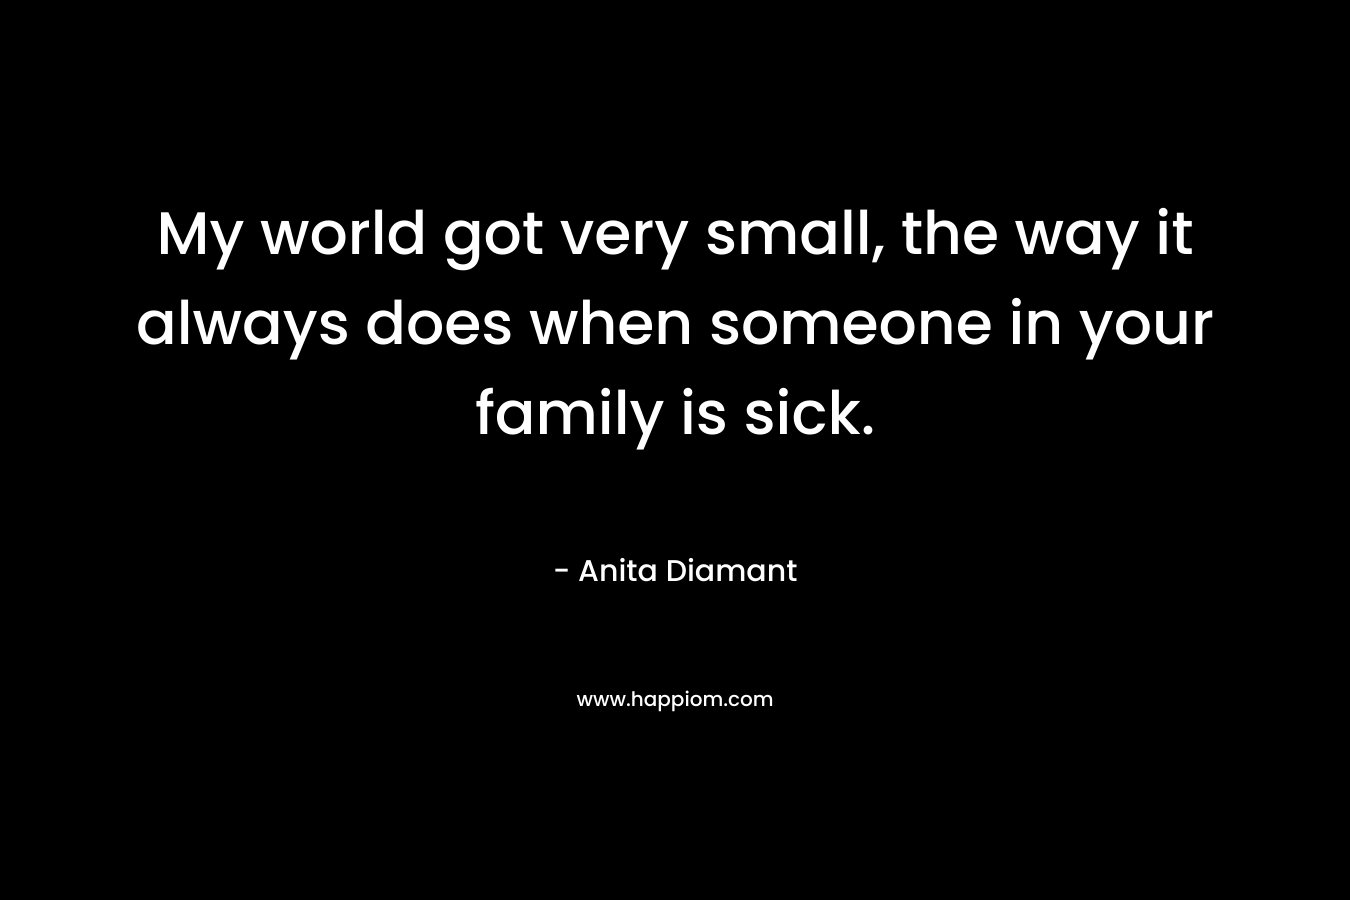 My world got very small, the way it always does when someone in your family is sick.